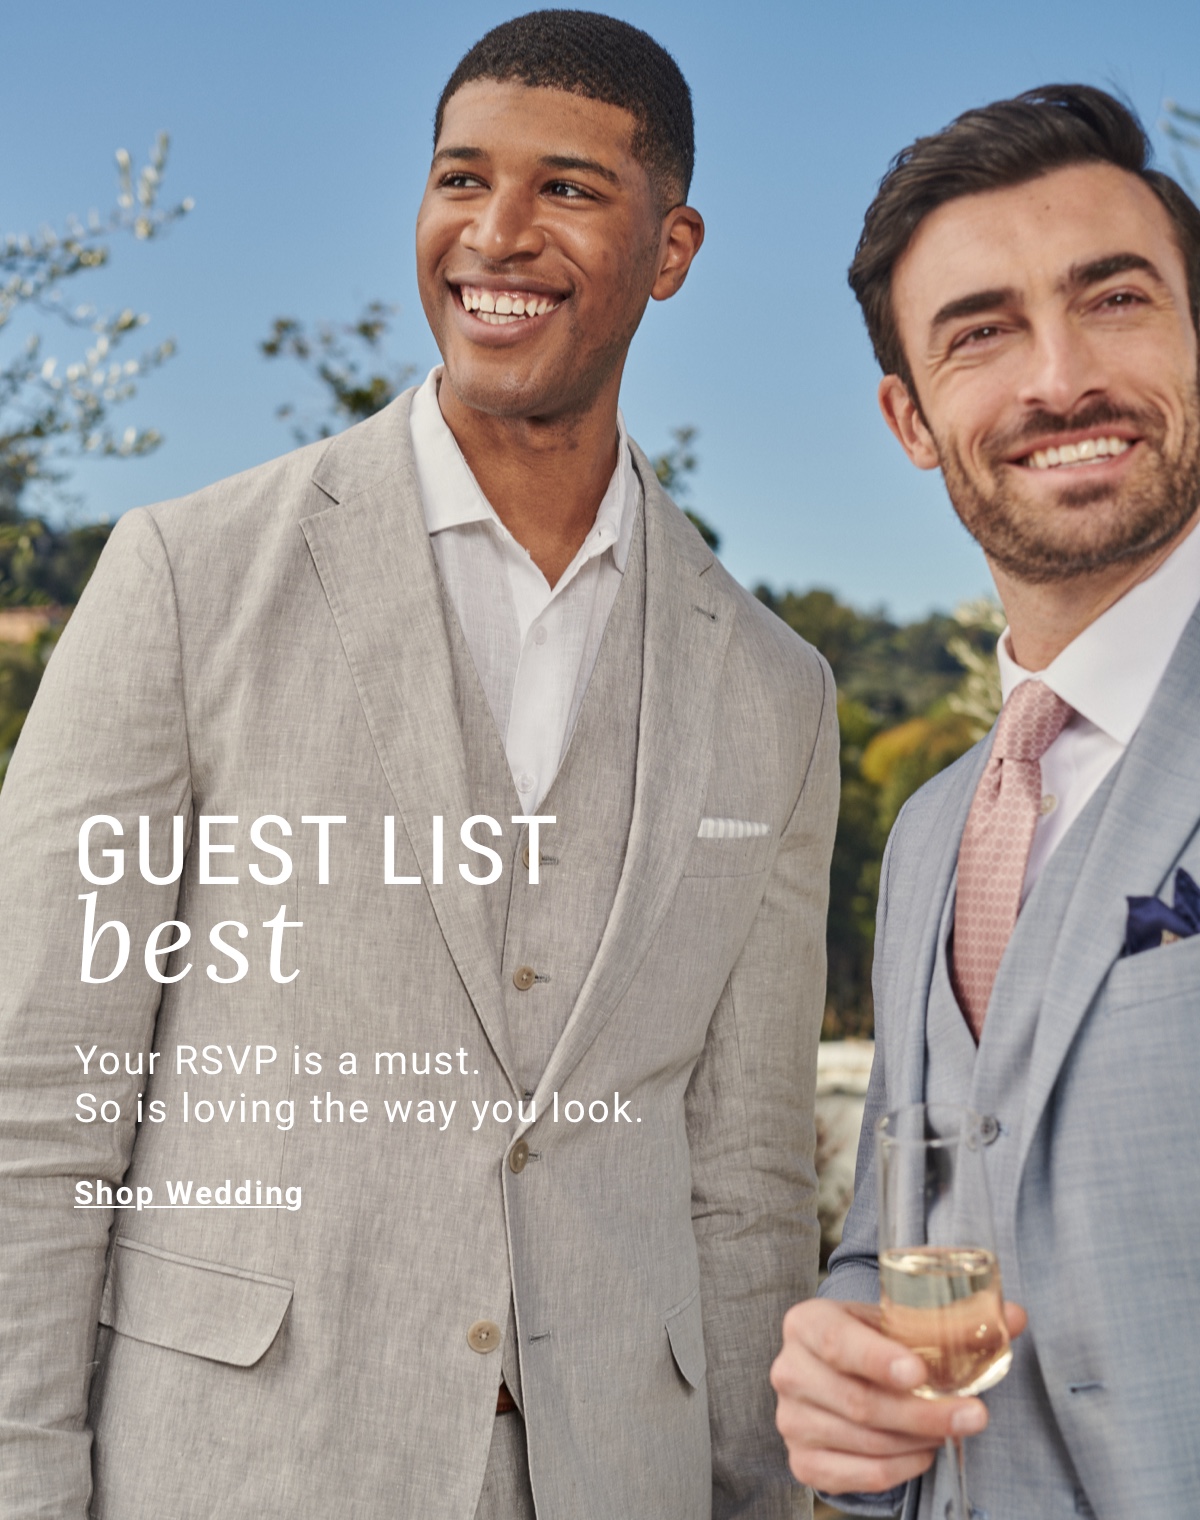 Guest List Best|Your RSVP is a must. So is loving the way you look.